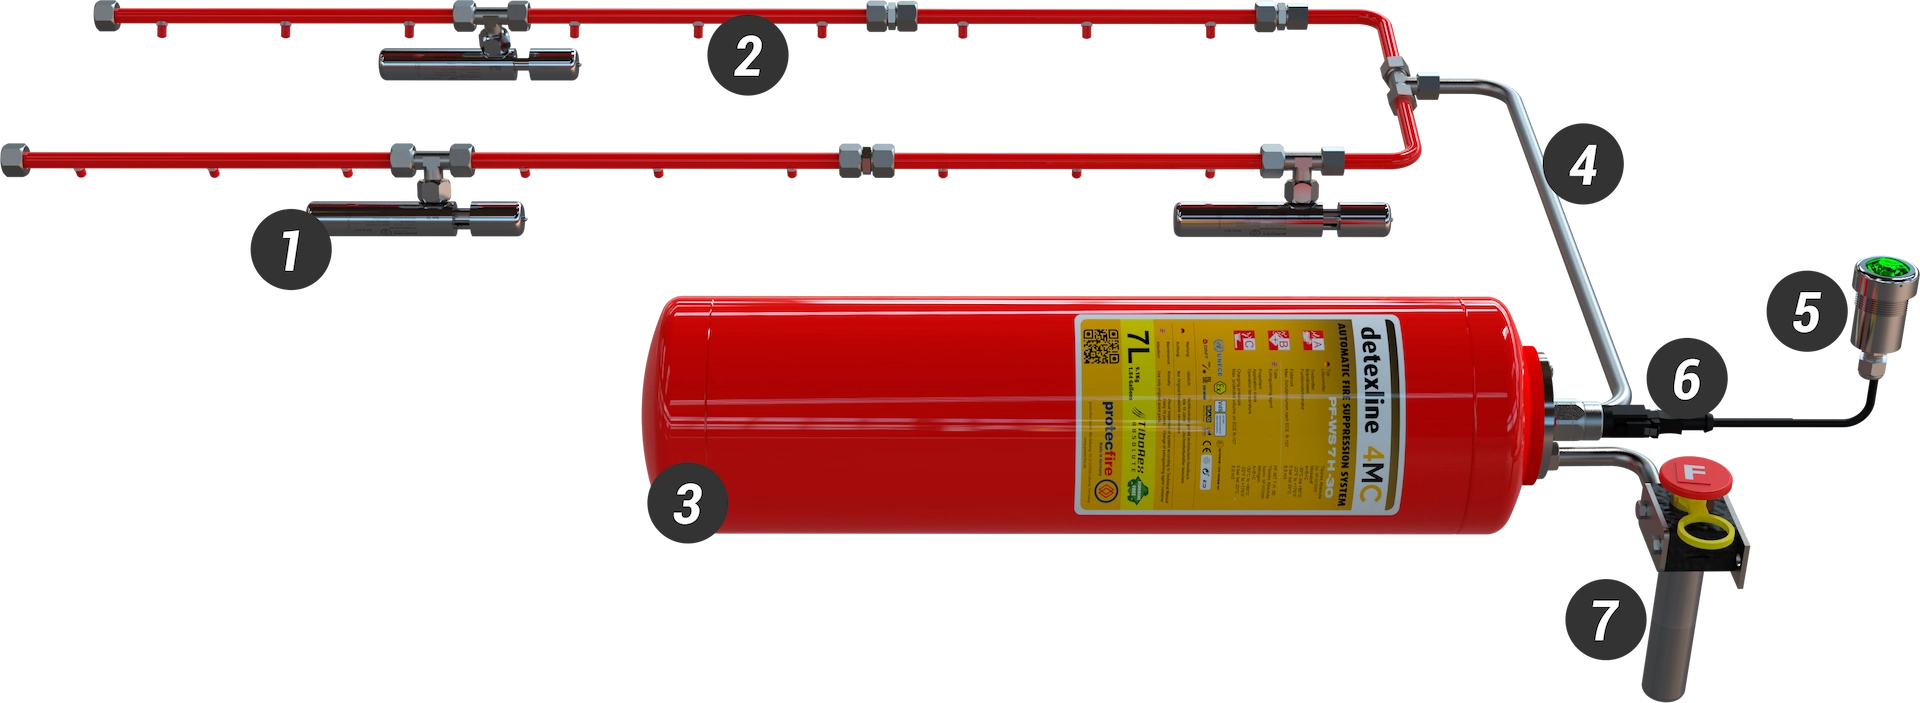 complete vehicle fire protection system by protecfire